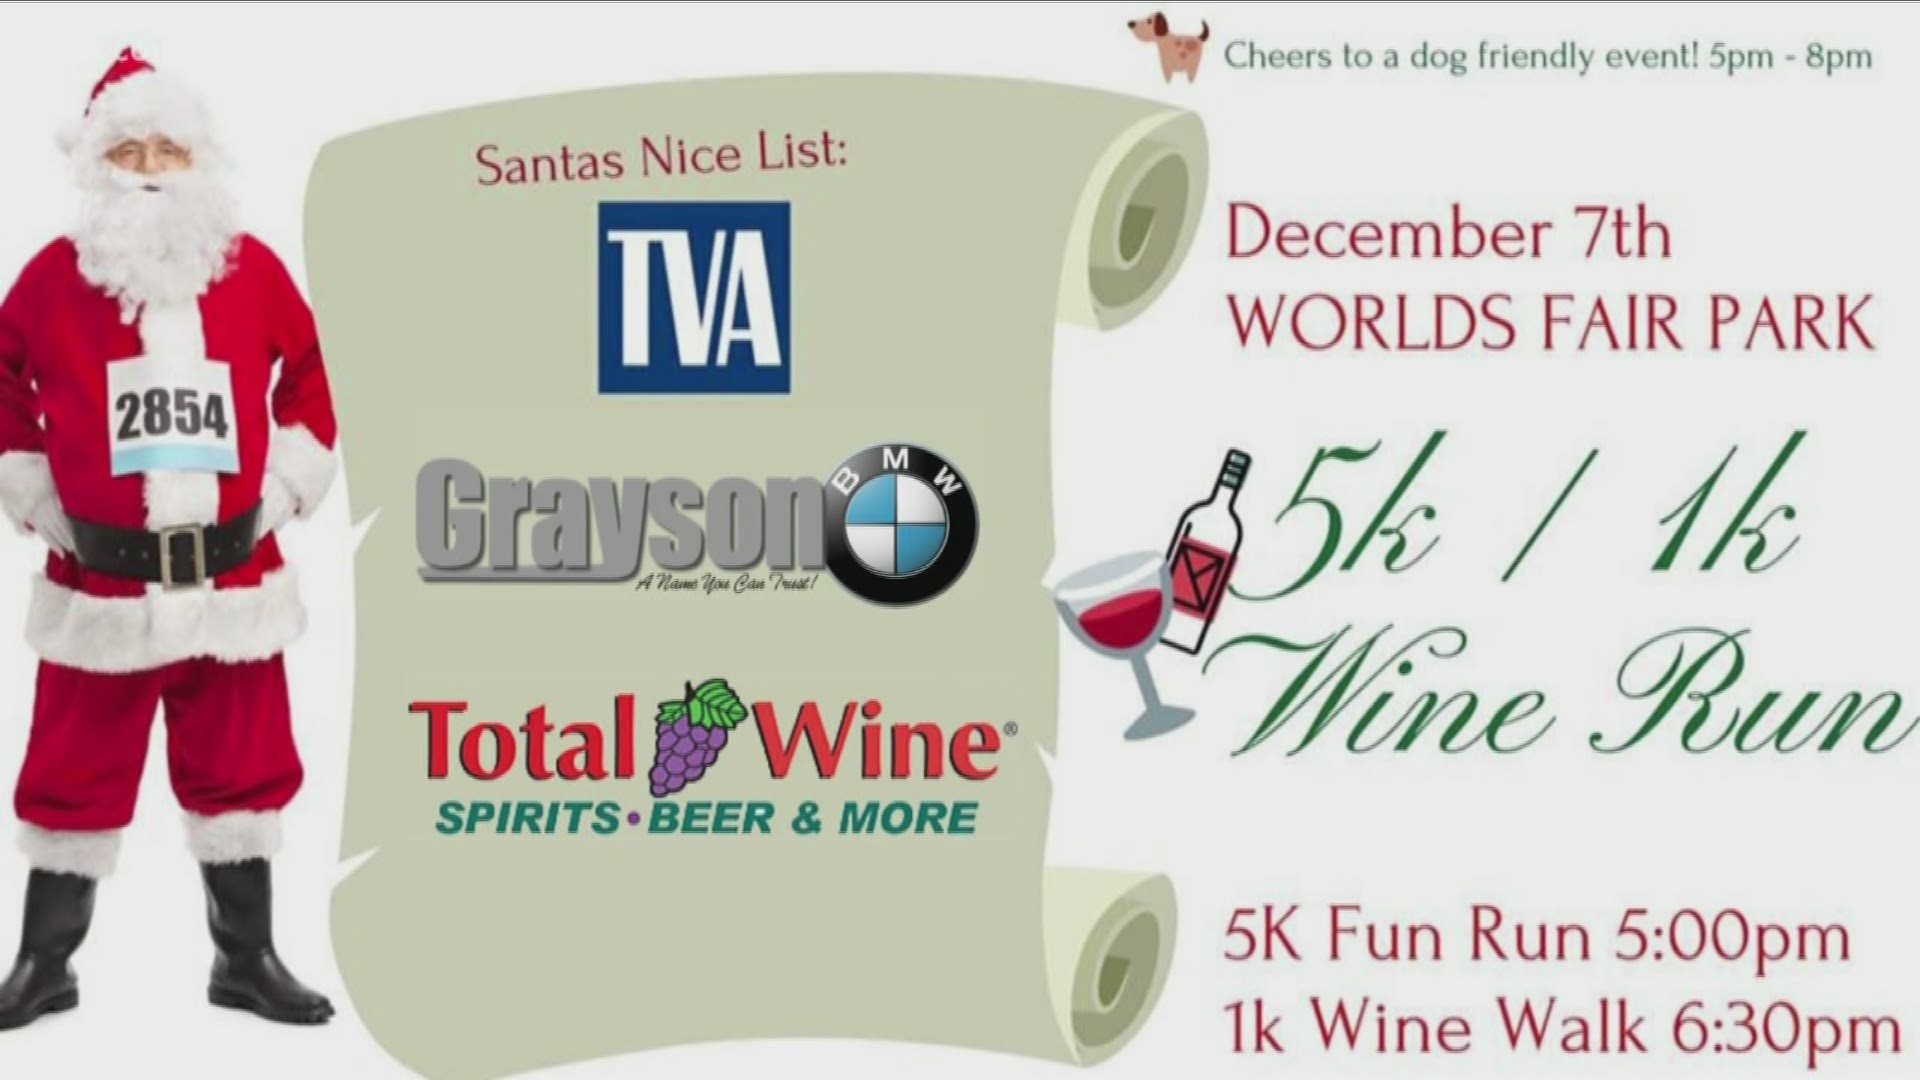 Mikhael Armao and Leslie Casteel join us from Tennessee Valley Coalition for the Homeless to help raise awareness while having fun with a Wine Run 5k.